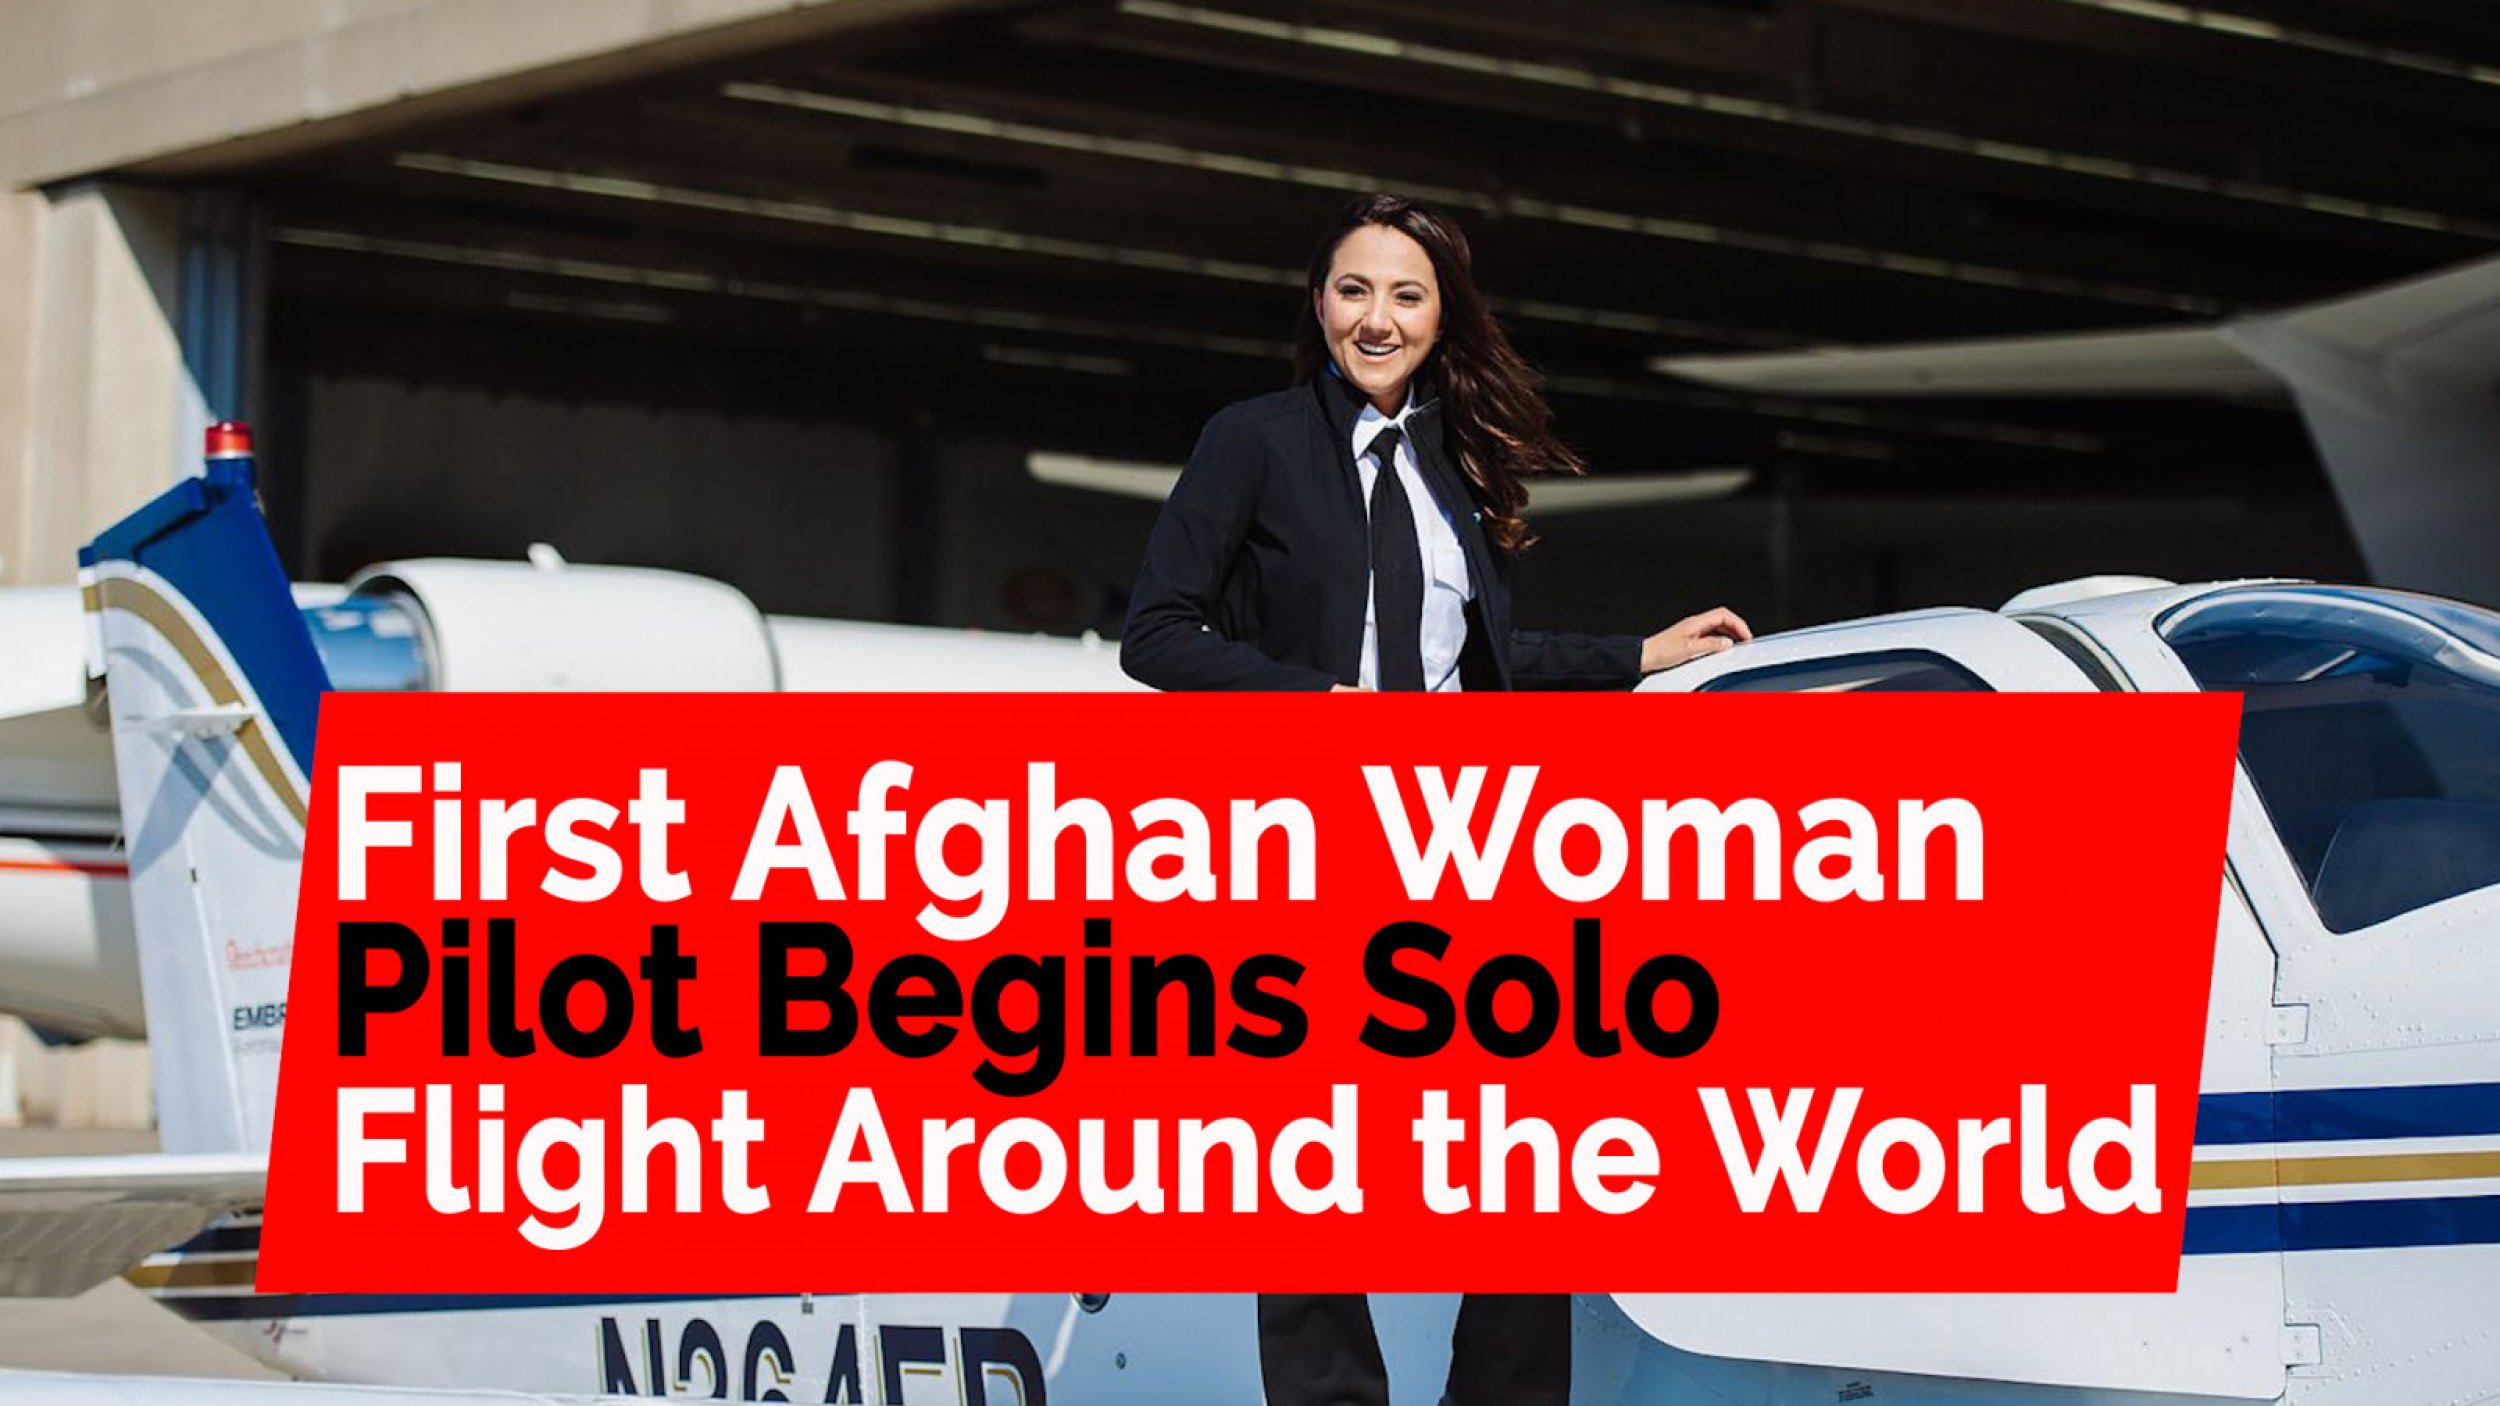 First Afghan Woman Pilot Begins Solo Flight Around the World